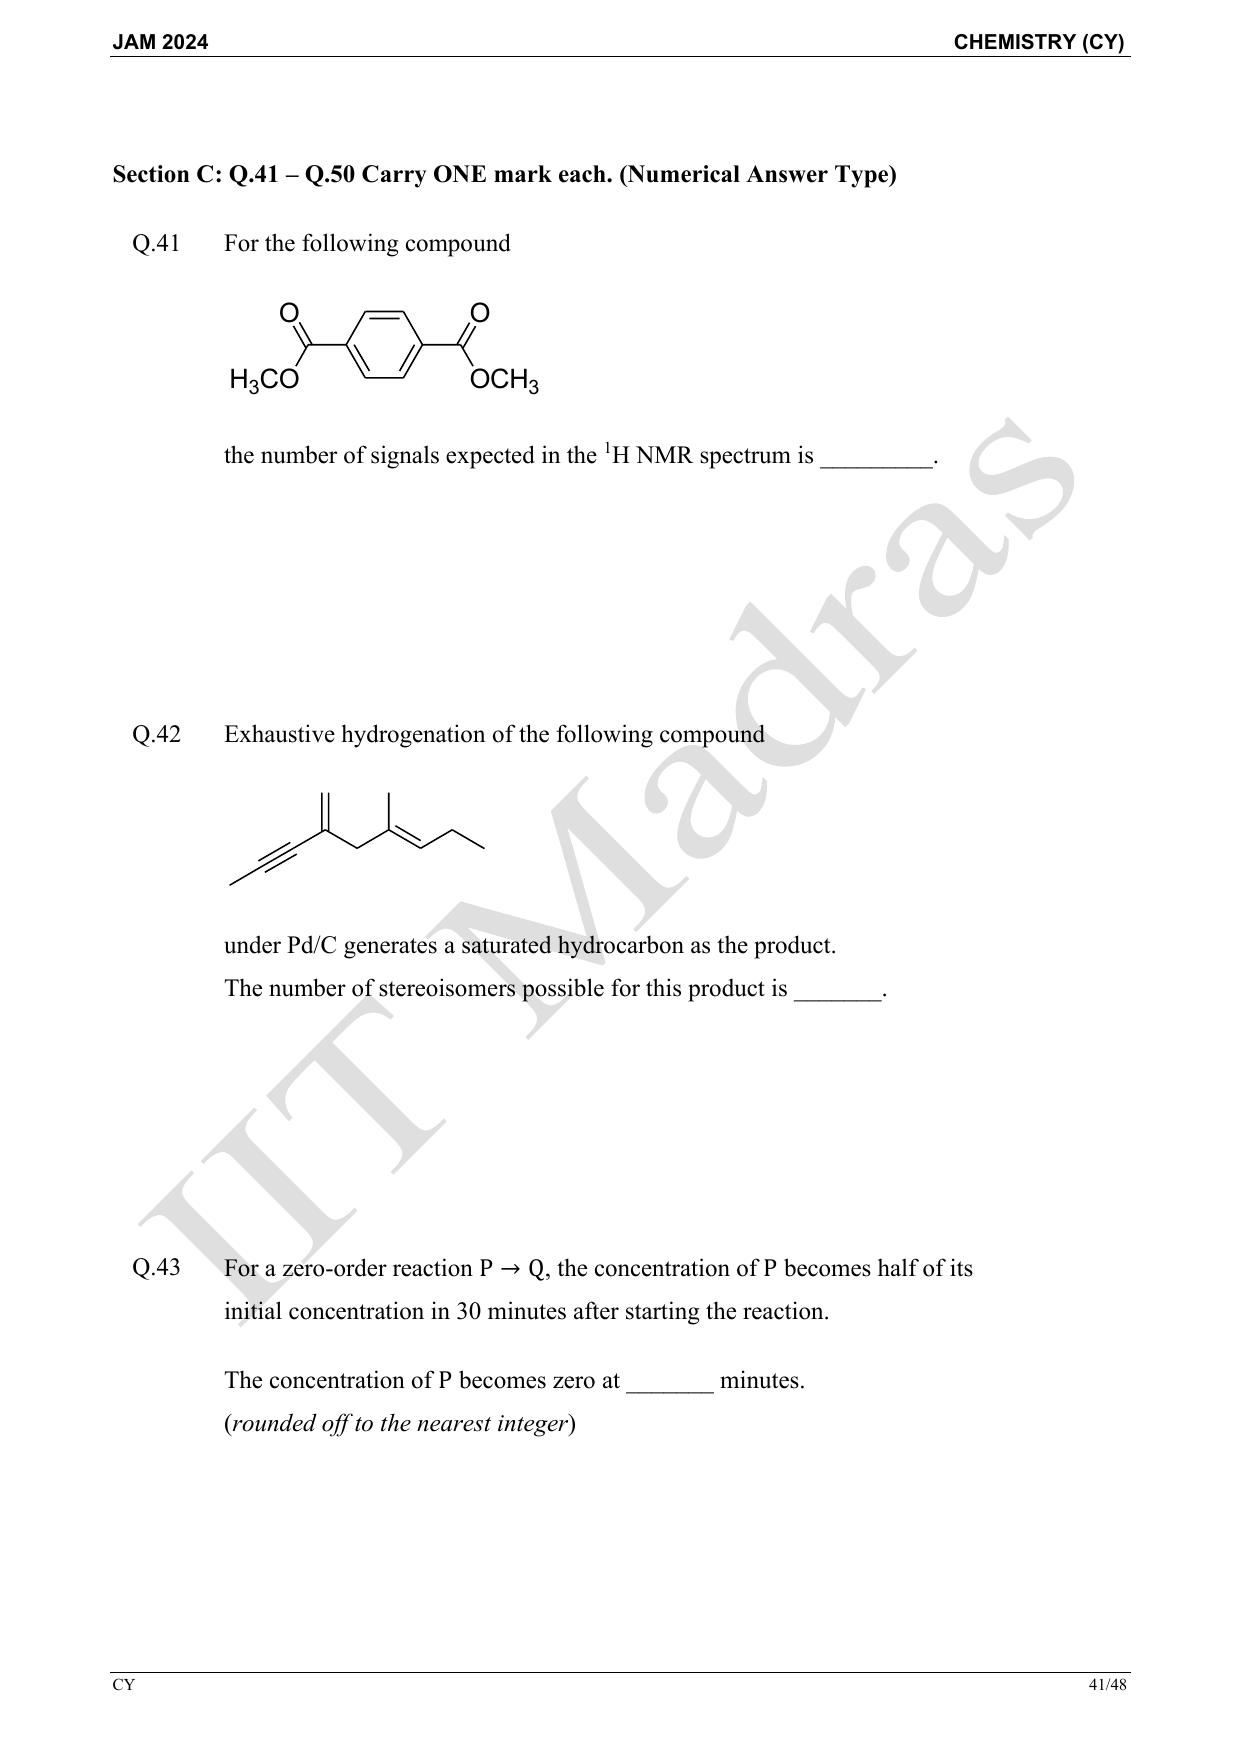 IIT JAM 2024 Chemistry (CY) Master Question Paper - Page 41